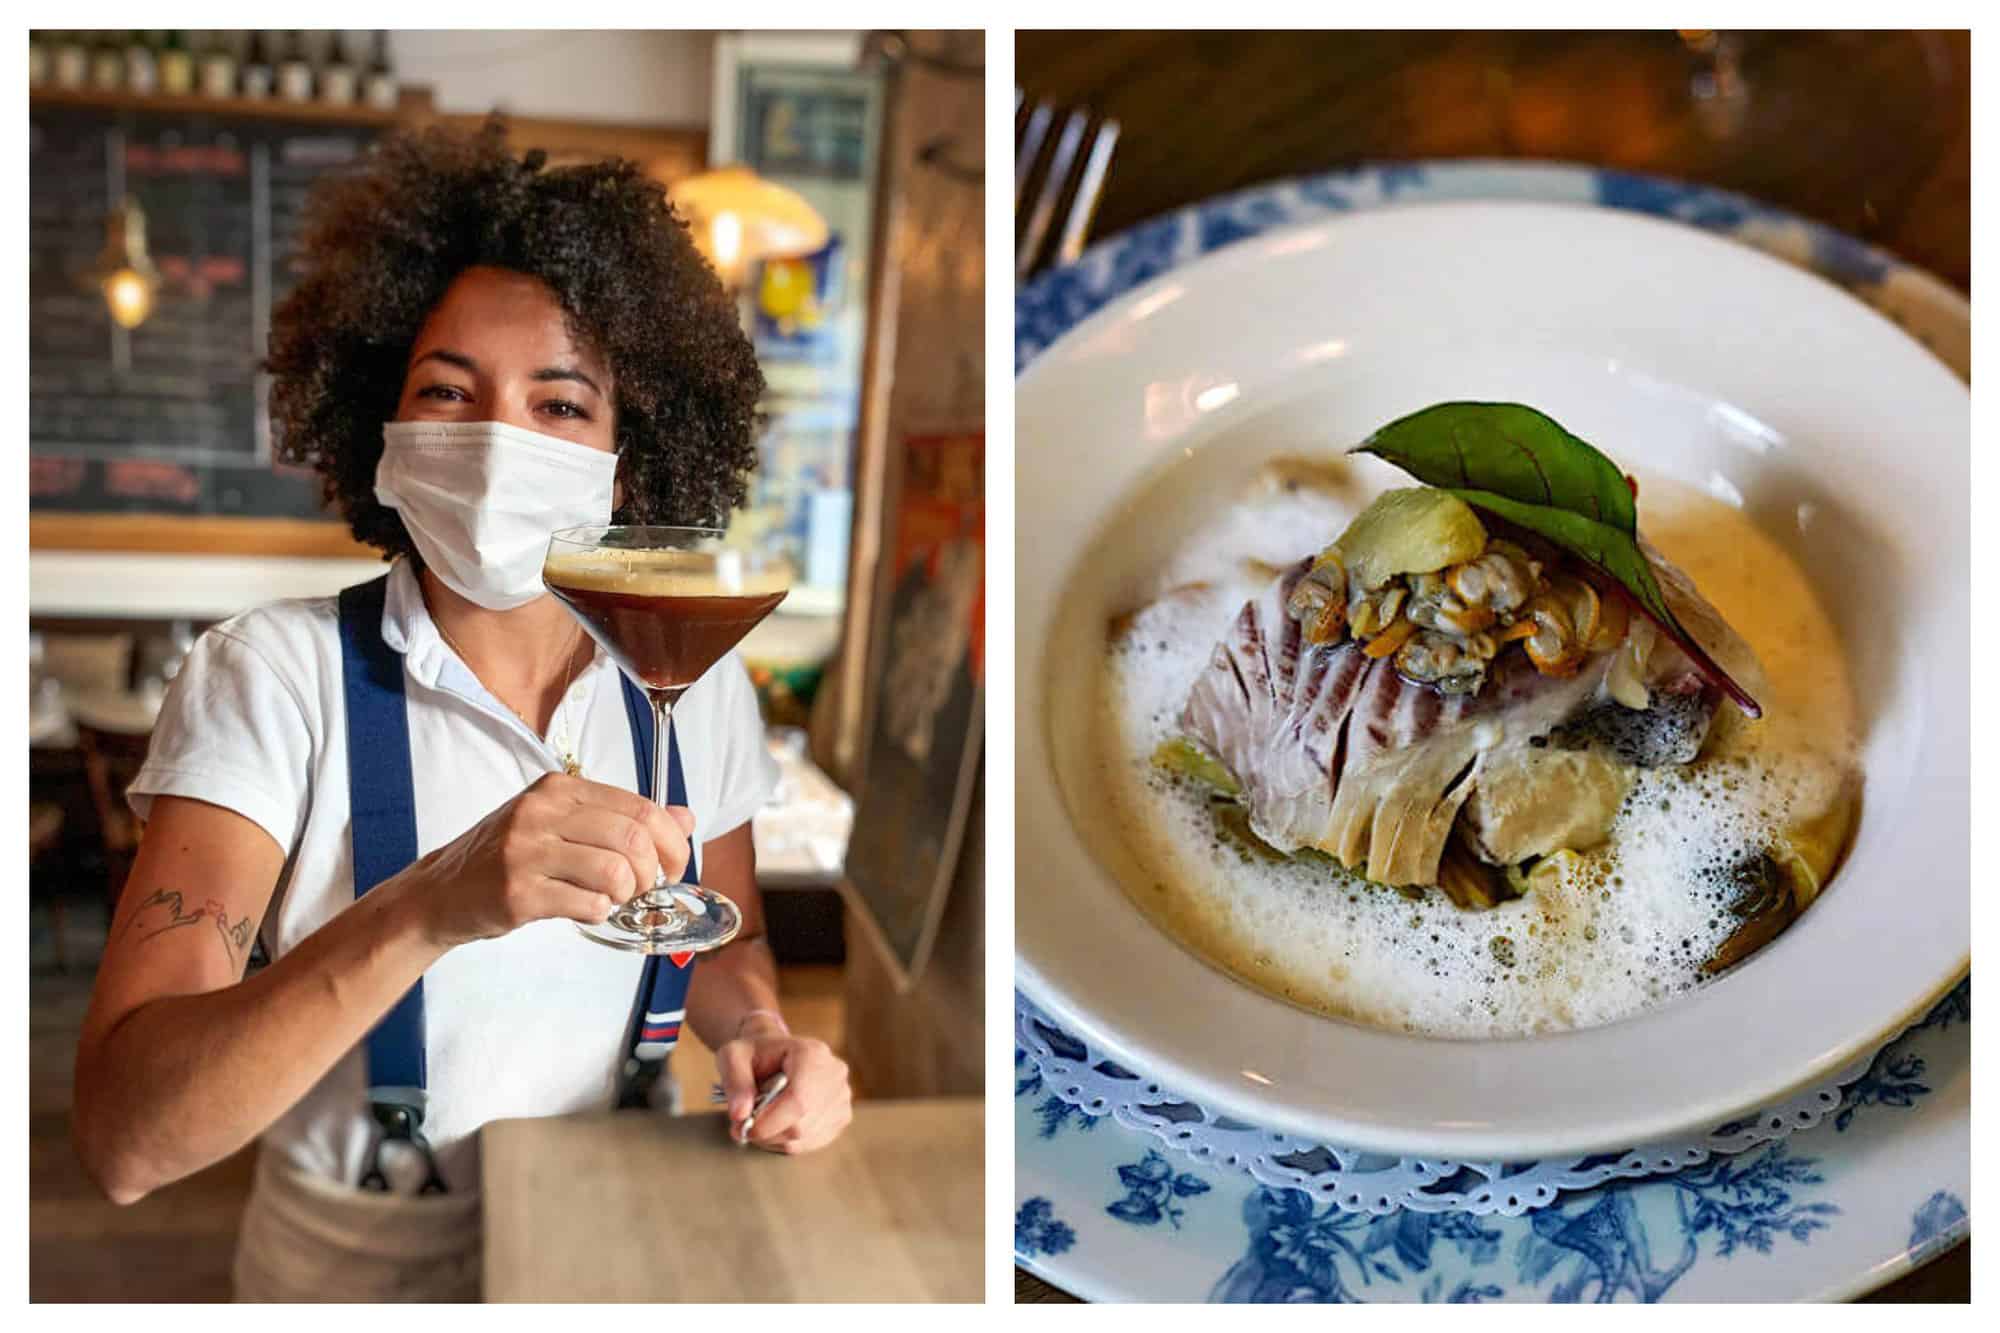 2 montages from the Parisian bistrot "Le Bon Georges". Left: An employee serves a martini espresso with a evident smile behind her white face mask. She is wearing a white polo shirt, blue suspenders, and beige trousers. Right: A close up of one of their menu, a fish dish, served in antique white and blue plates, creamy sauce, and garnished with a fresh herb.